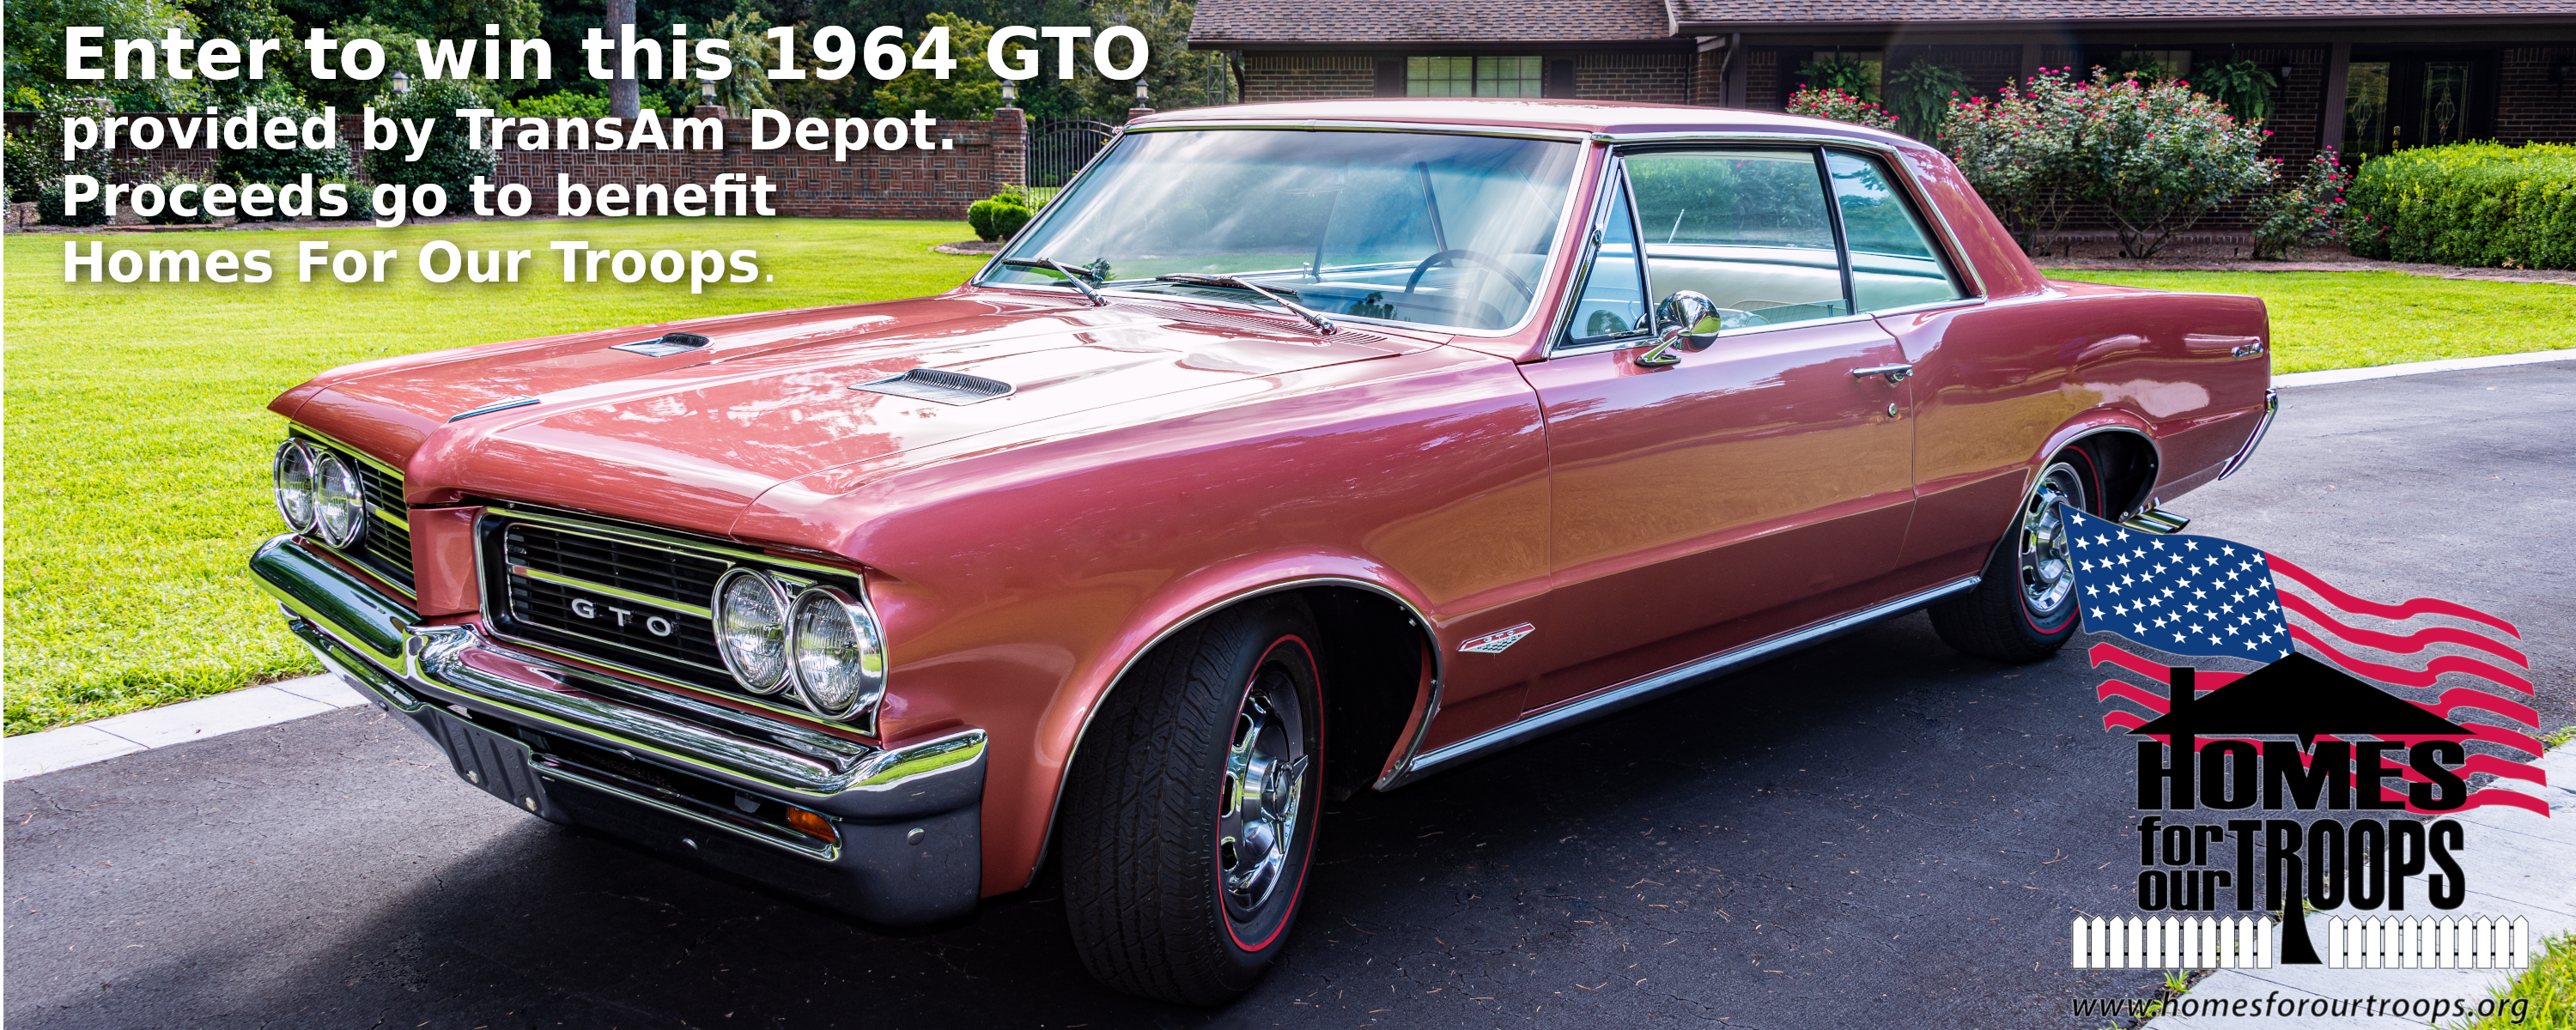 Ultra-Rare, Fully Restored ’64 Pontiac GTO Giveaway